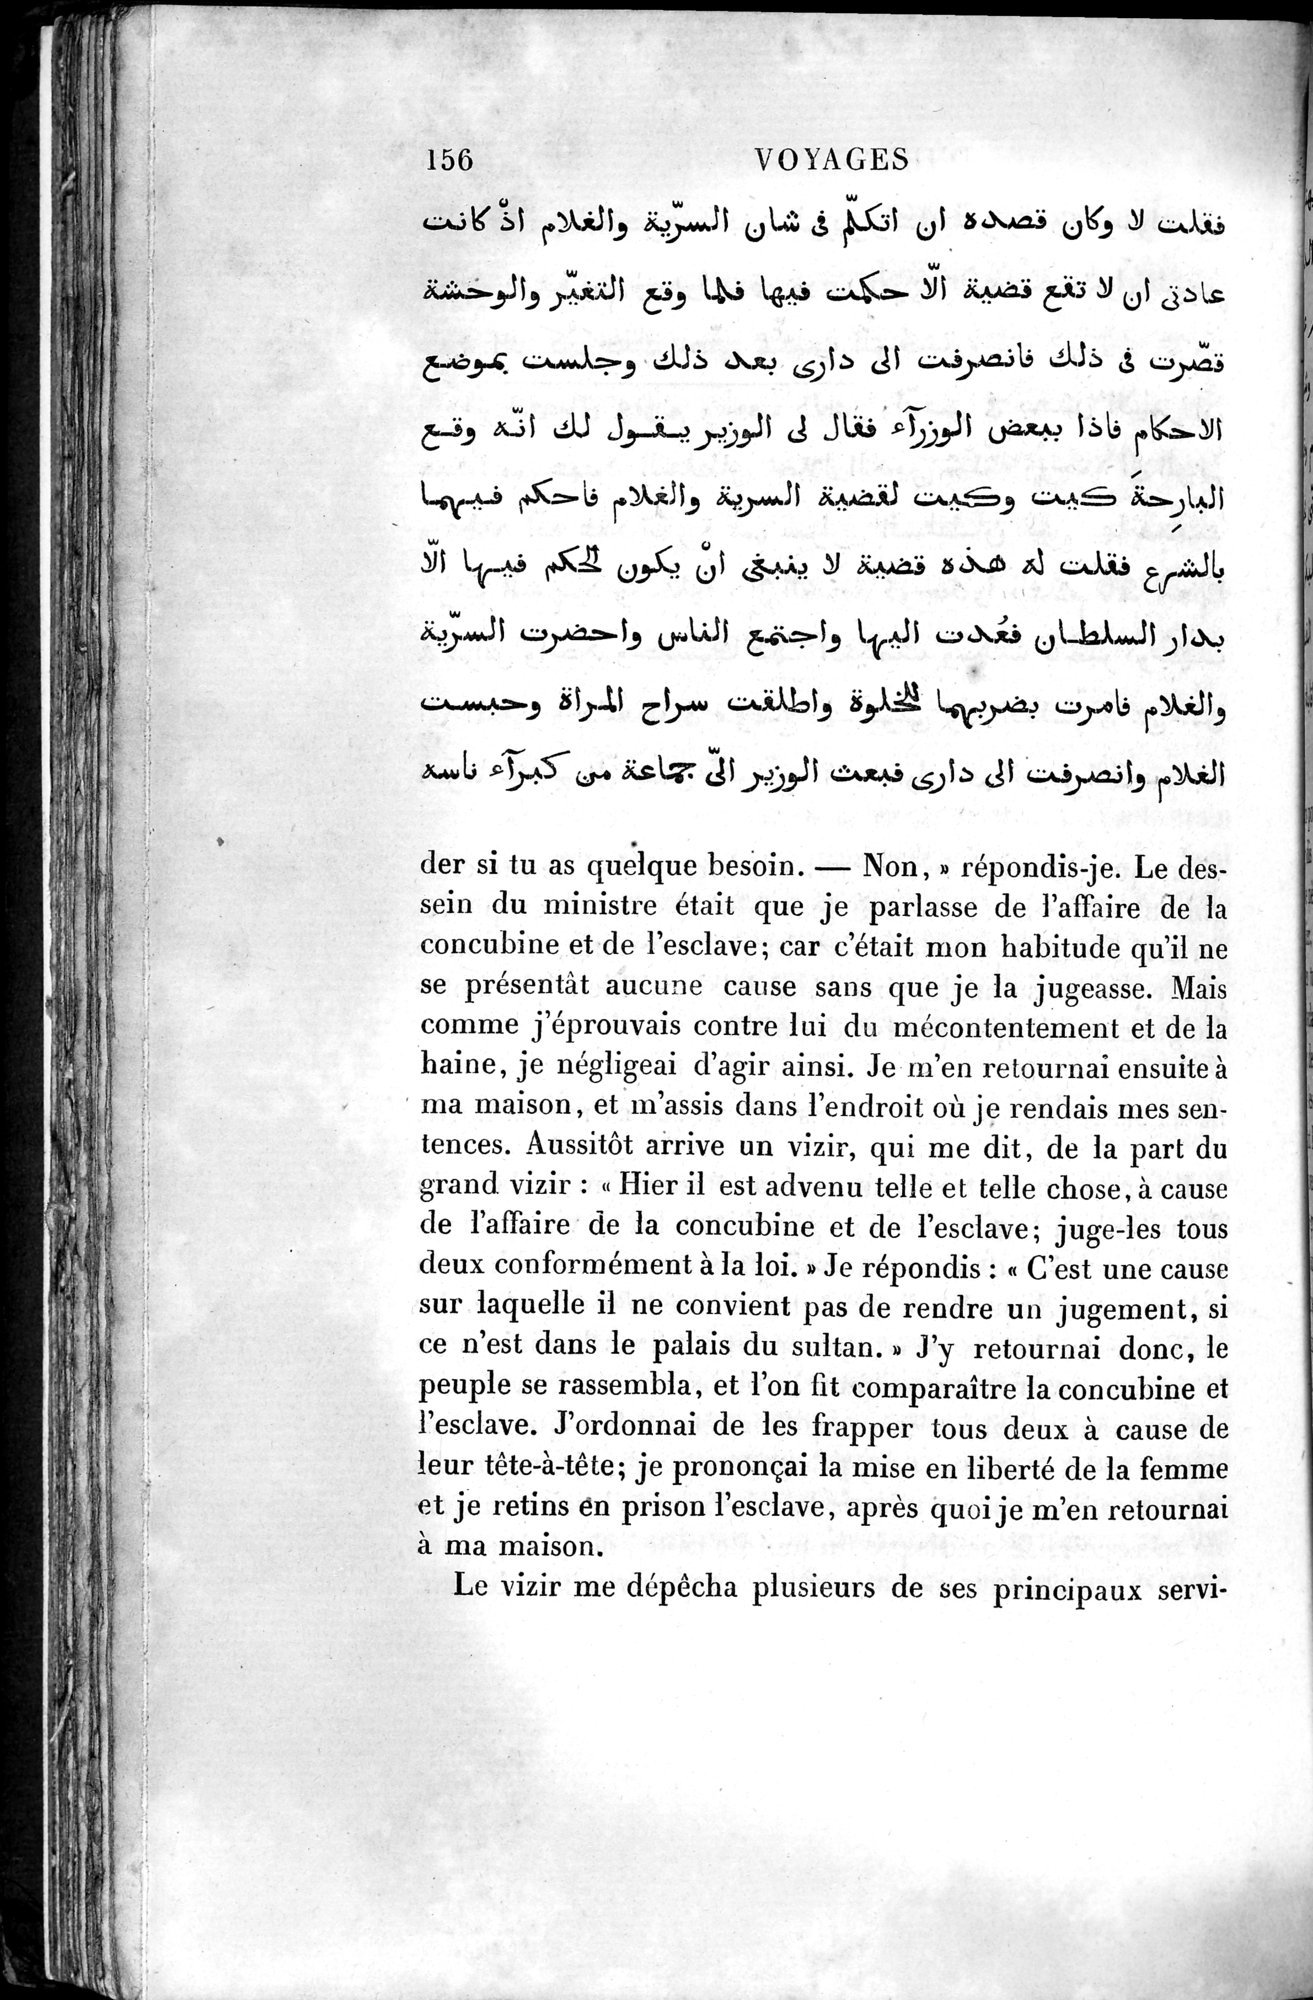 Voyages d'Ibn Batoutah : vol.4 / Page 168 (Grayscale High Resolution Image)